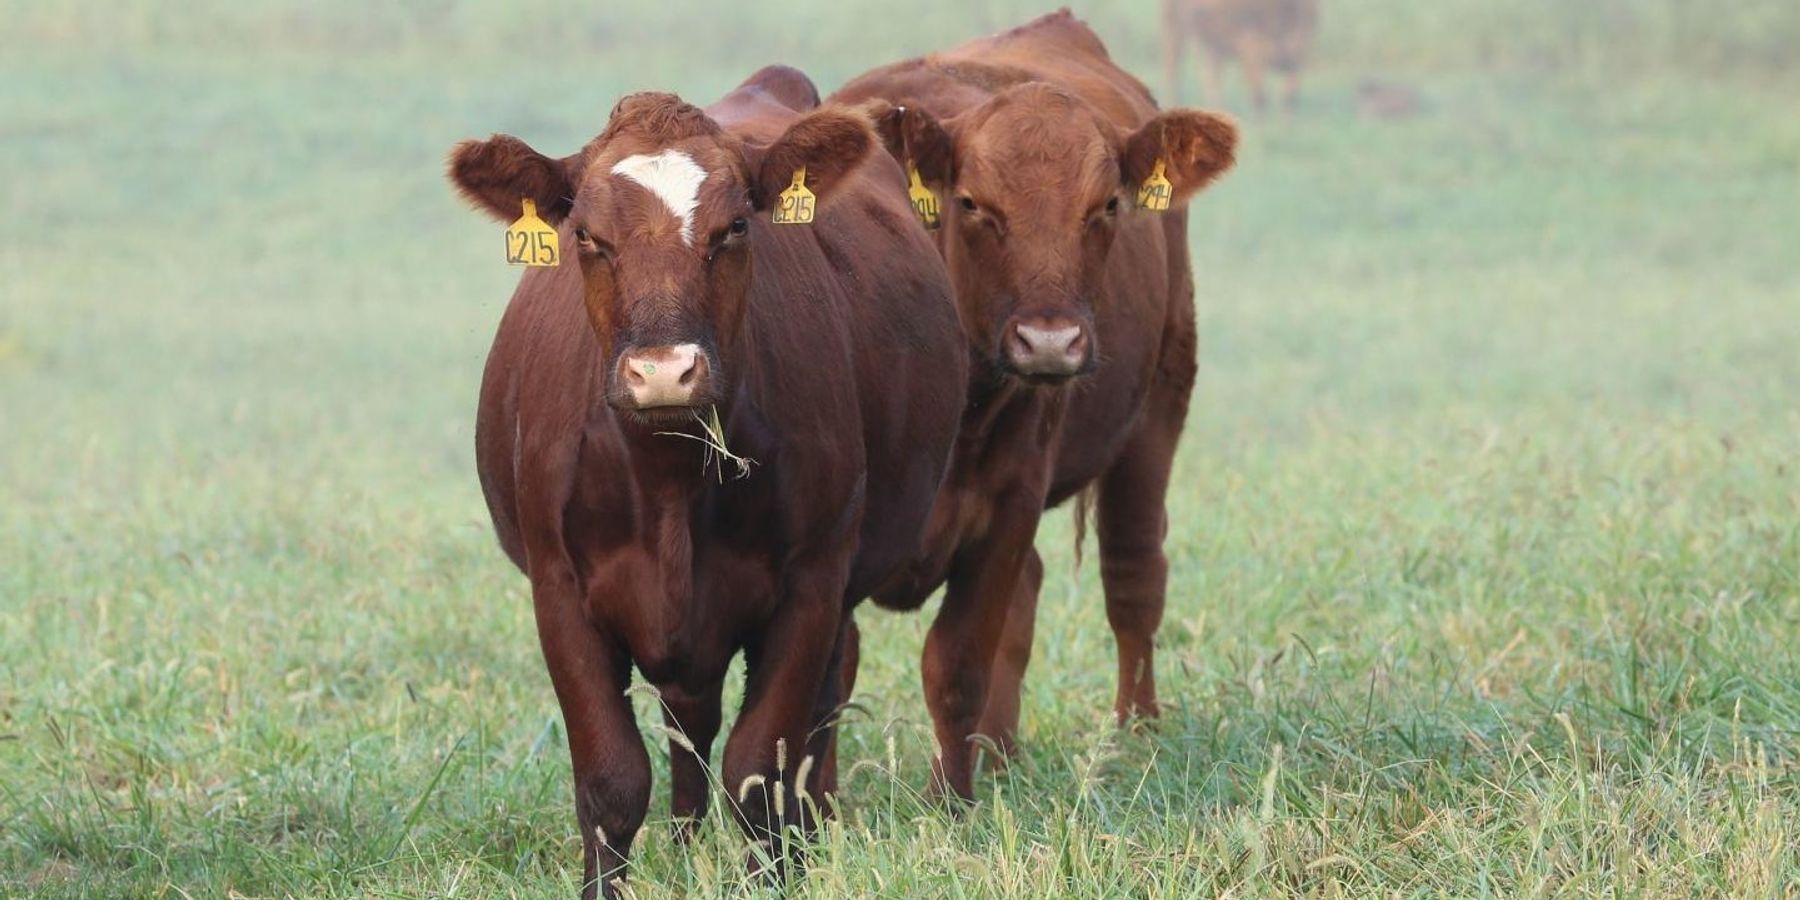 Cattle losing adaptations to environment